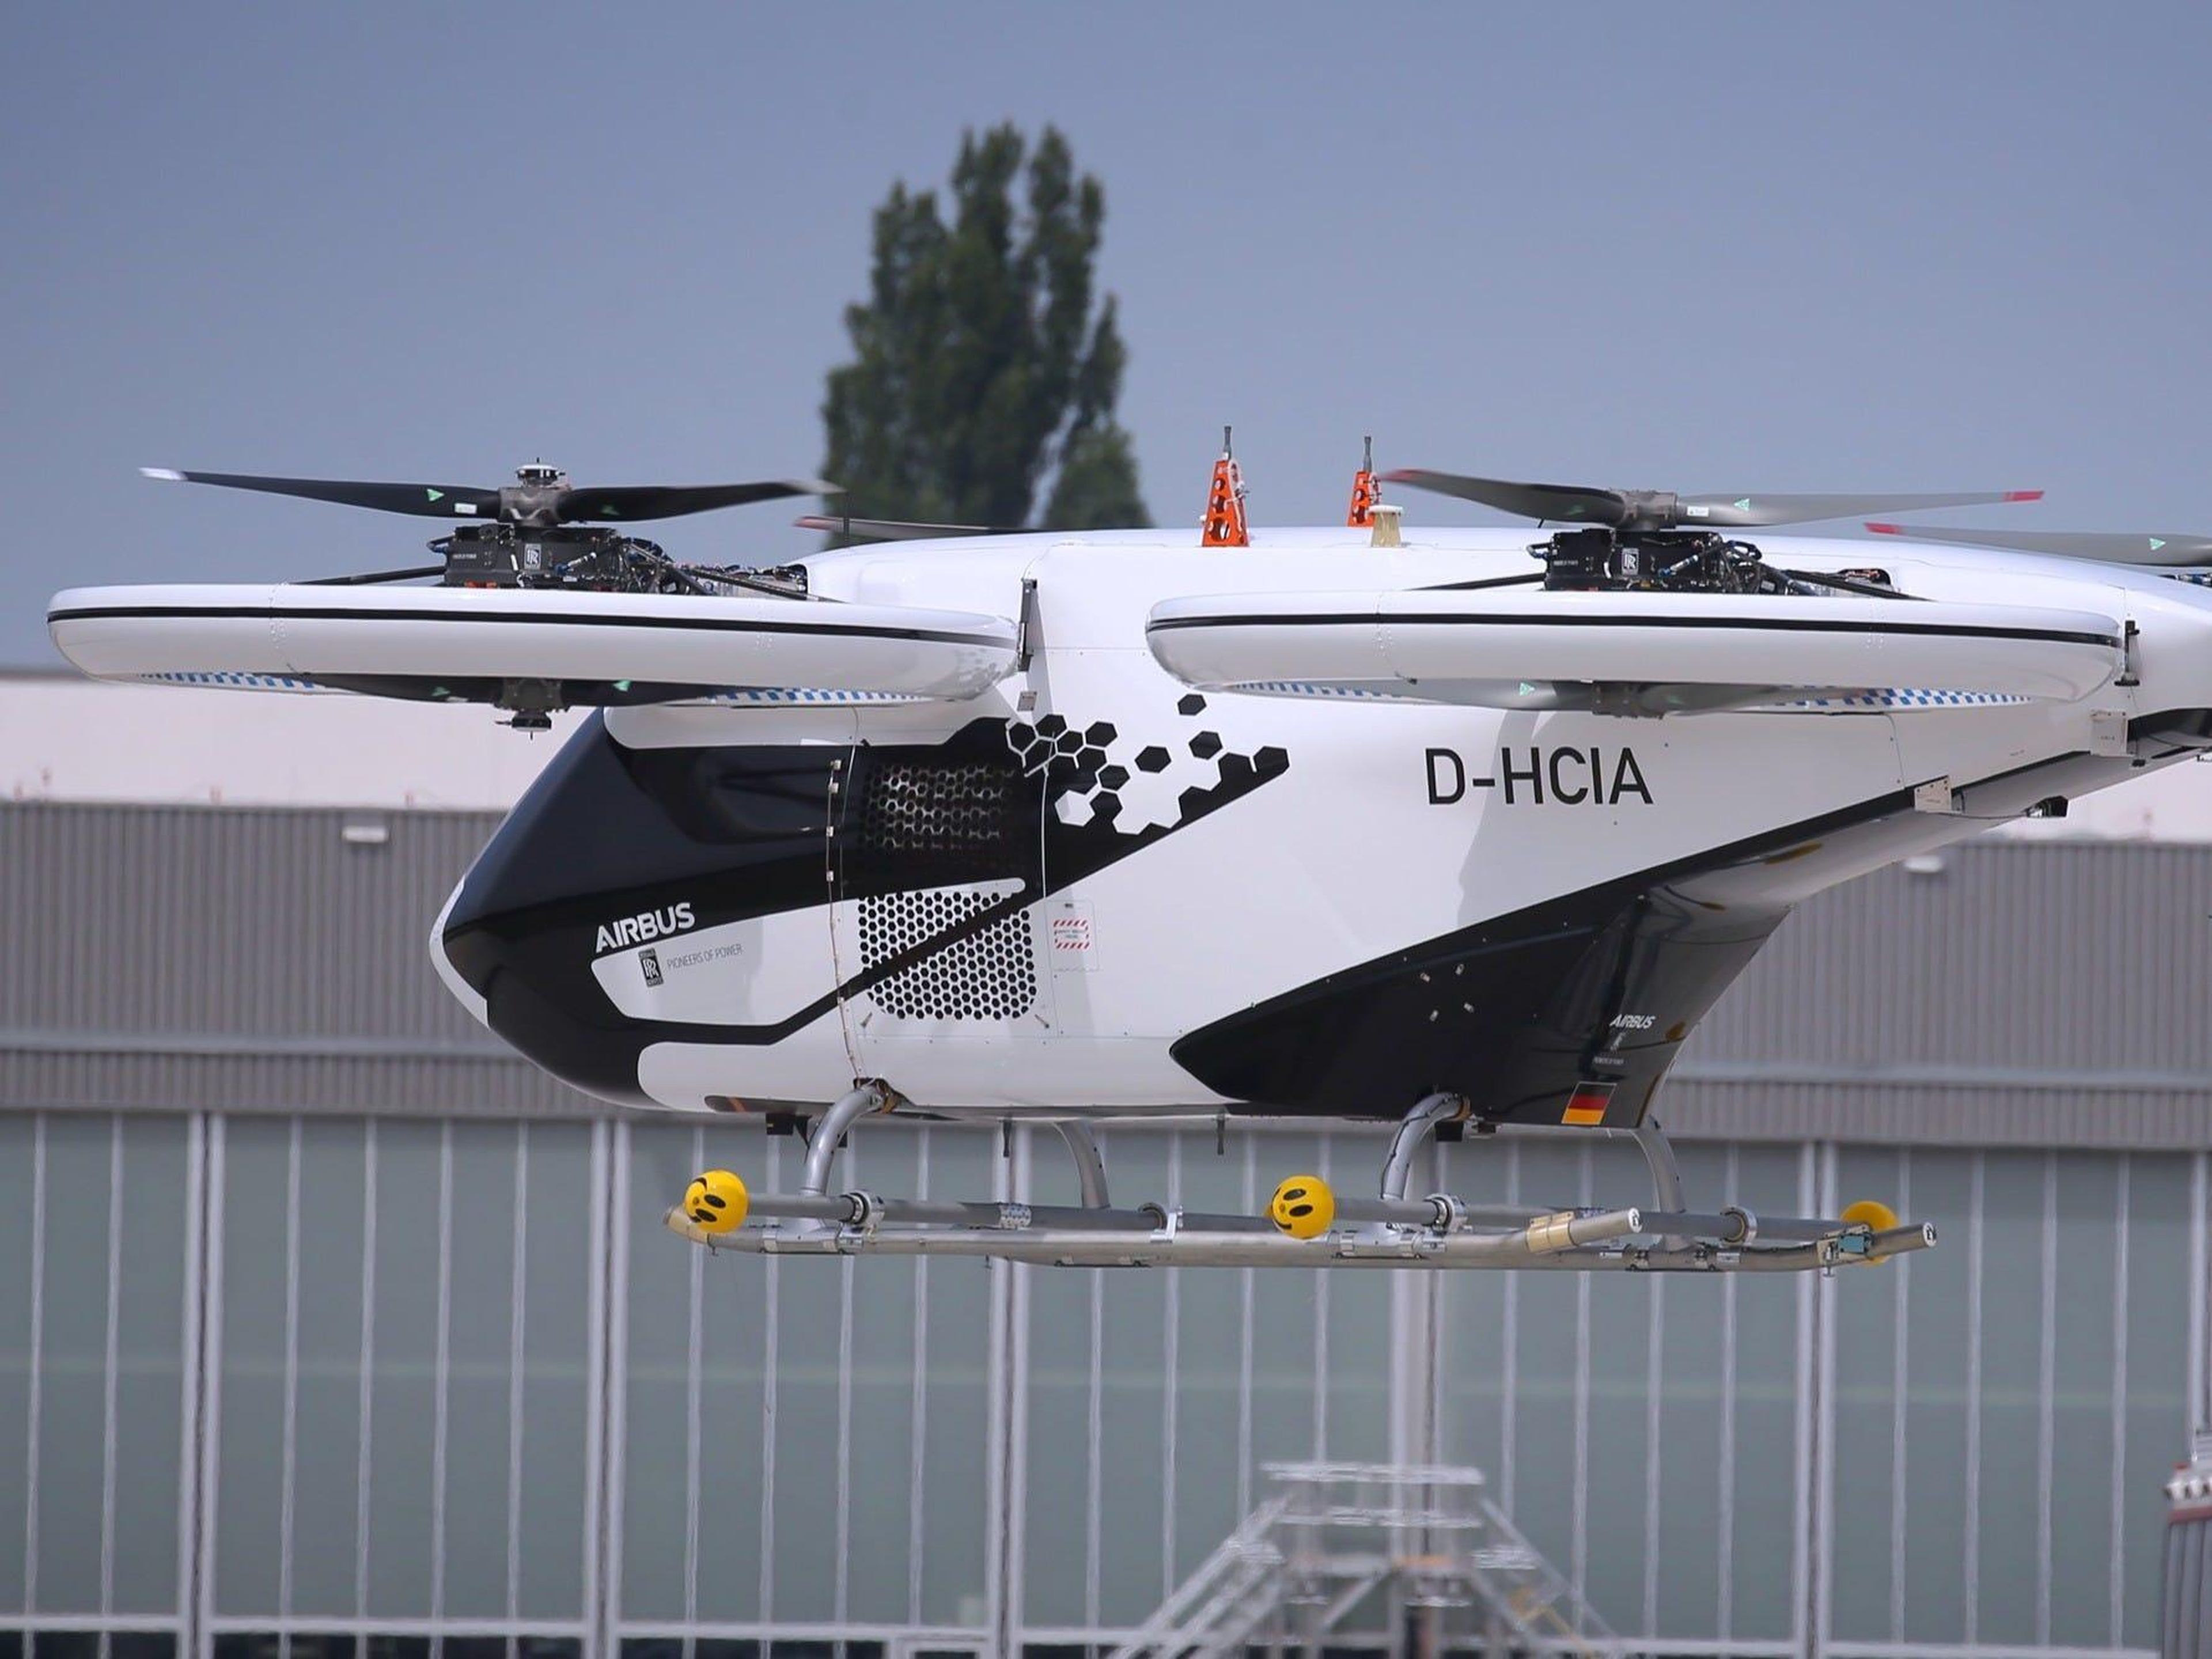 But with Airbus' experience in aircraft and helicopter manufacturing, eVTOLs like CityAirbus could be flying passengers before its competitors.